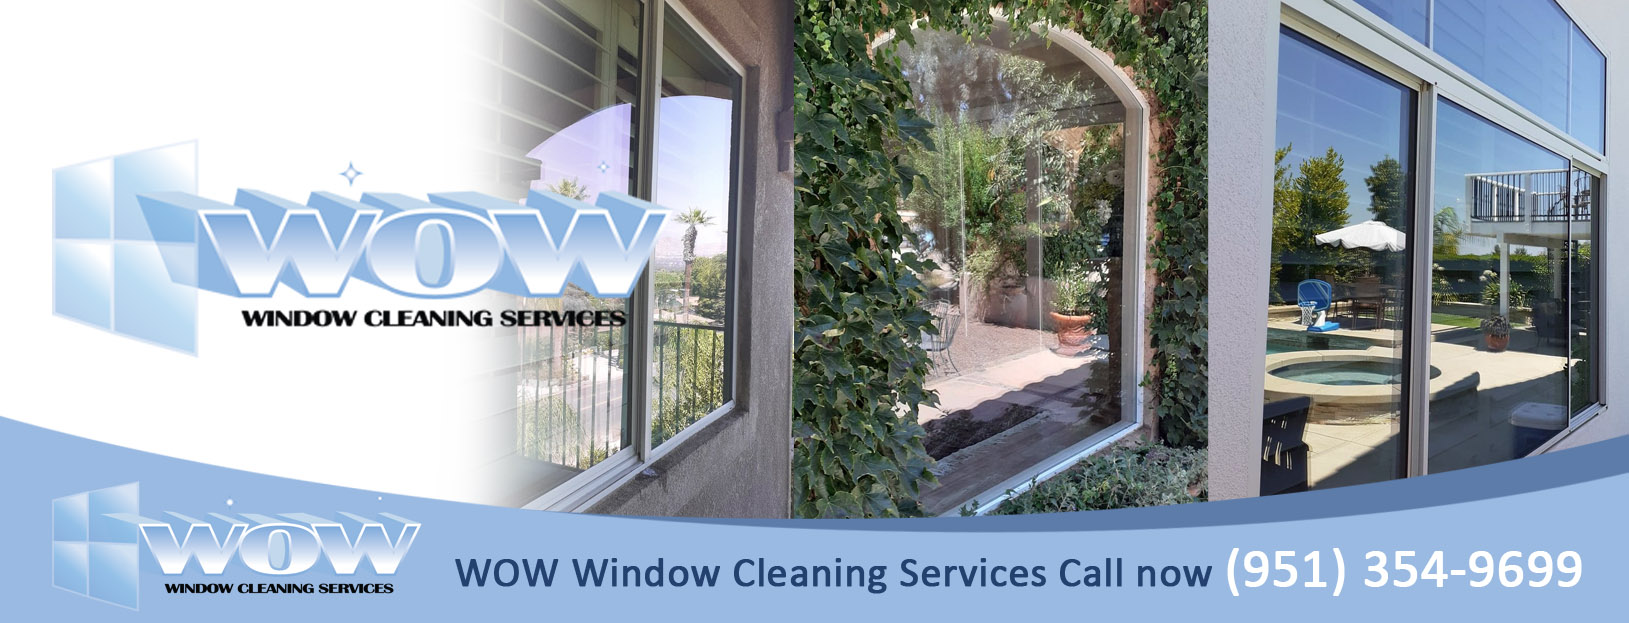 Moreno Valley Riverside Windown Cleaning, house pressure wash, shutters 7